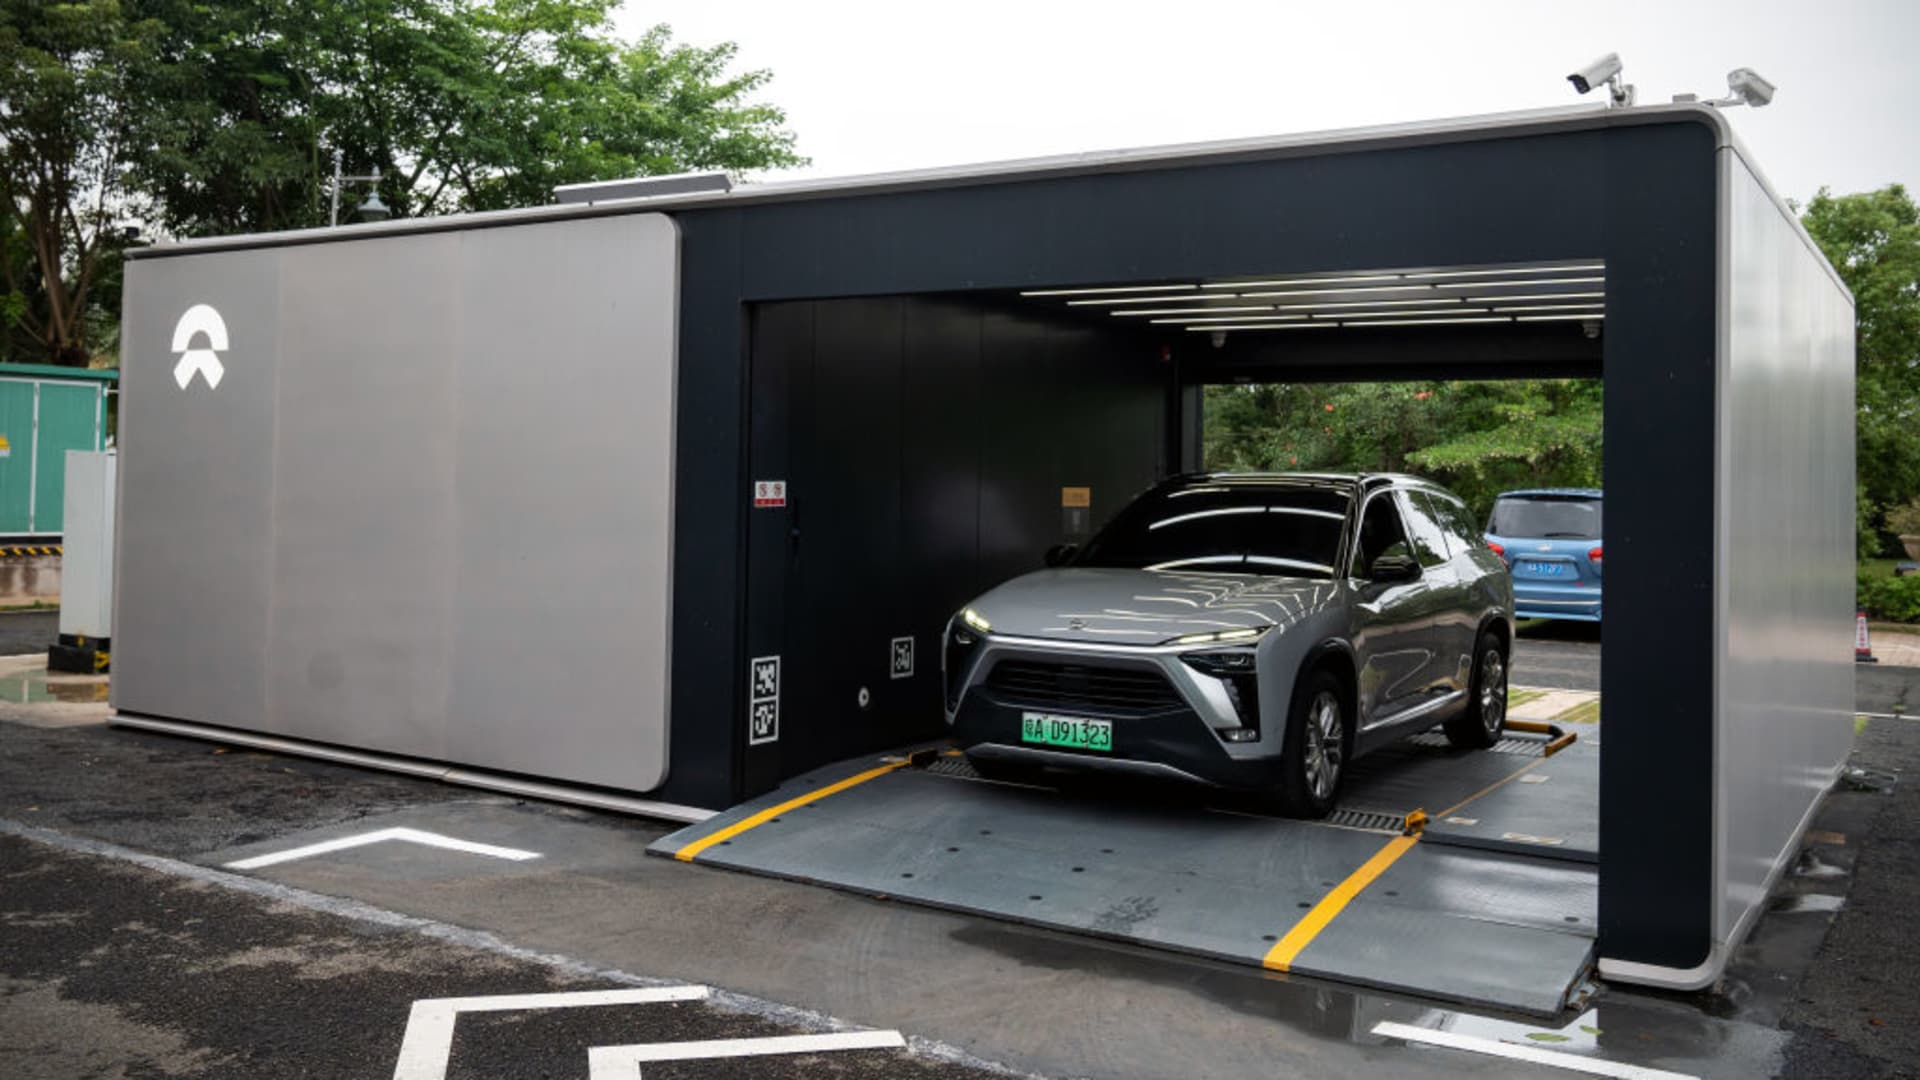 China's Nio to expand battery swapping services to gain EV infrastructure lead